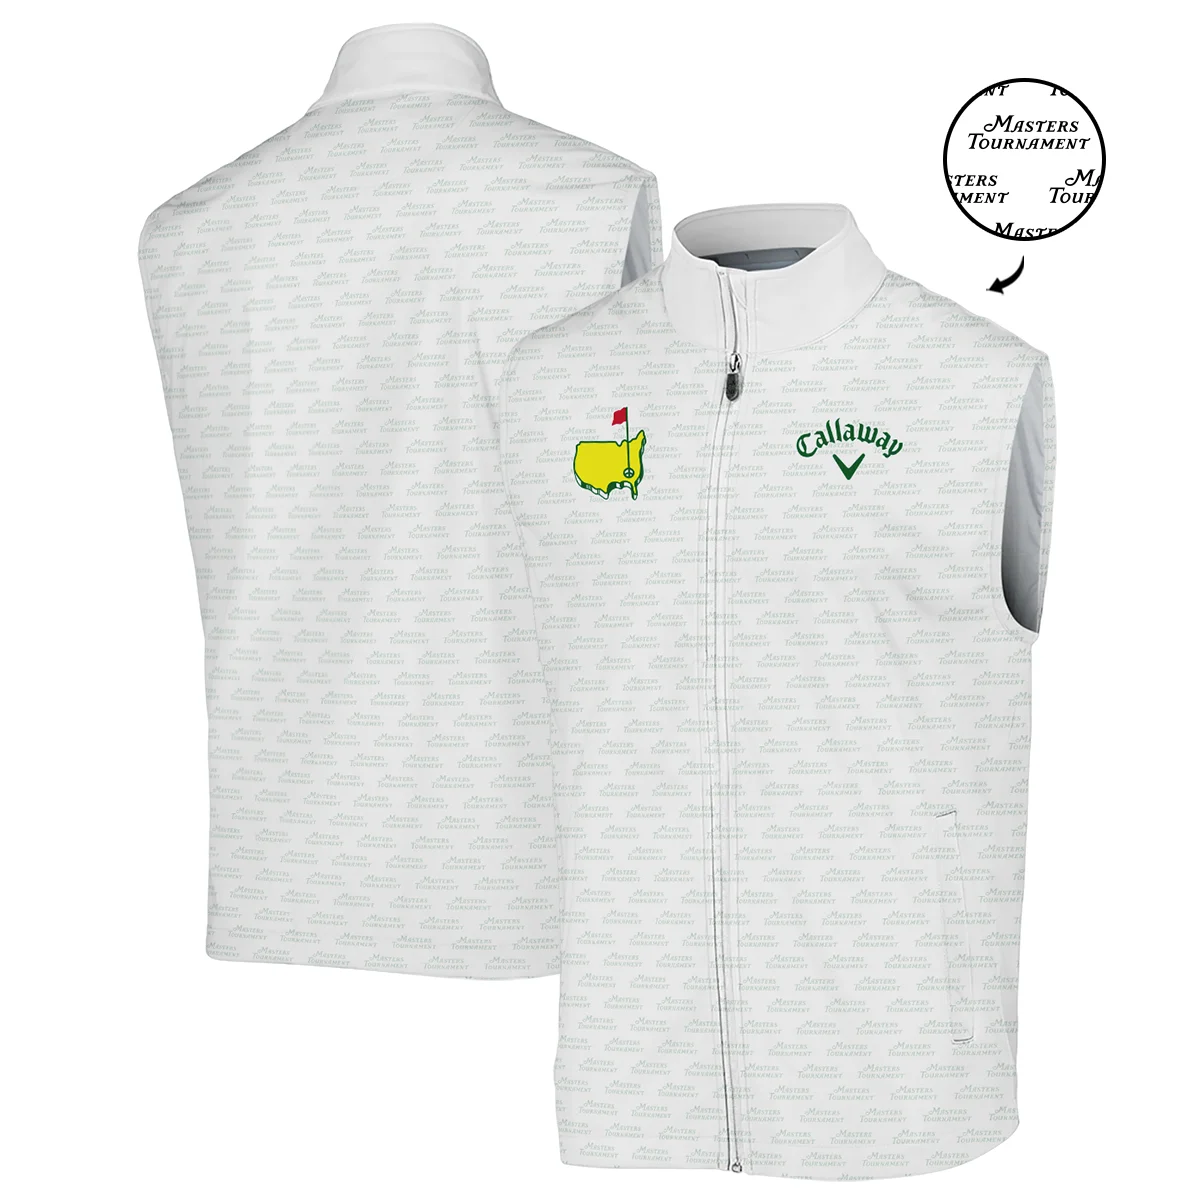 Masters Tournament Golf Callaway Bomber Jacket Logo Text Pattern White Green Golf Sports All Over Print Bomber Jacket